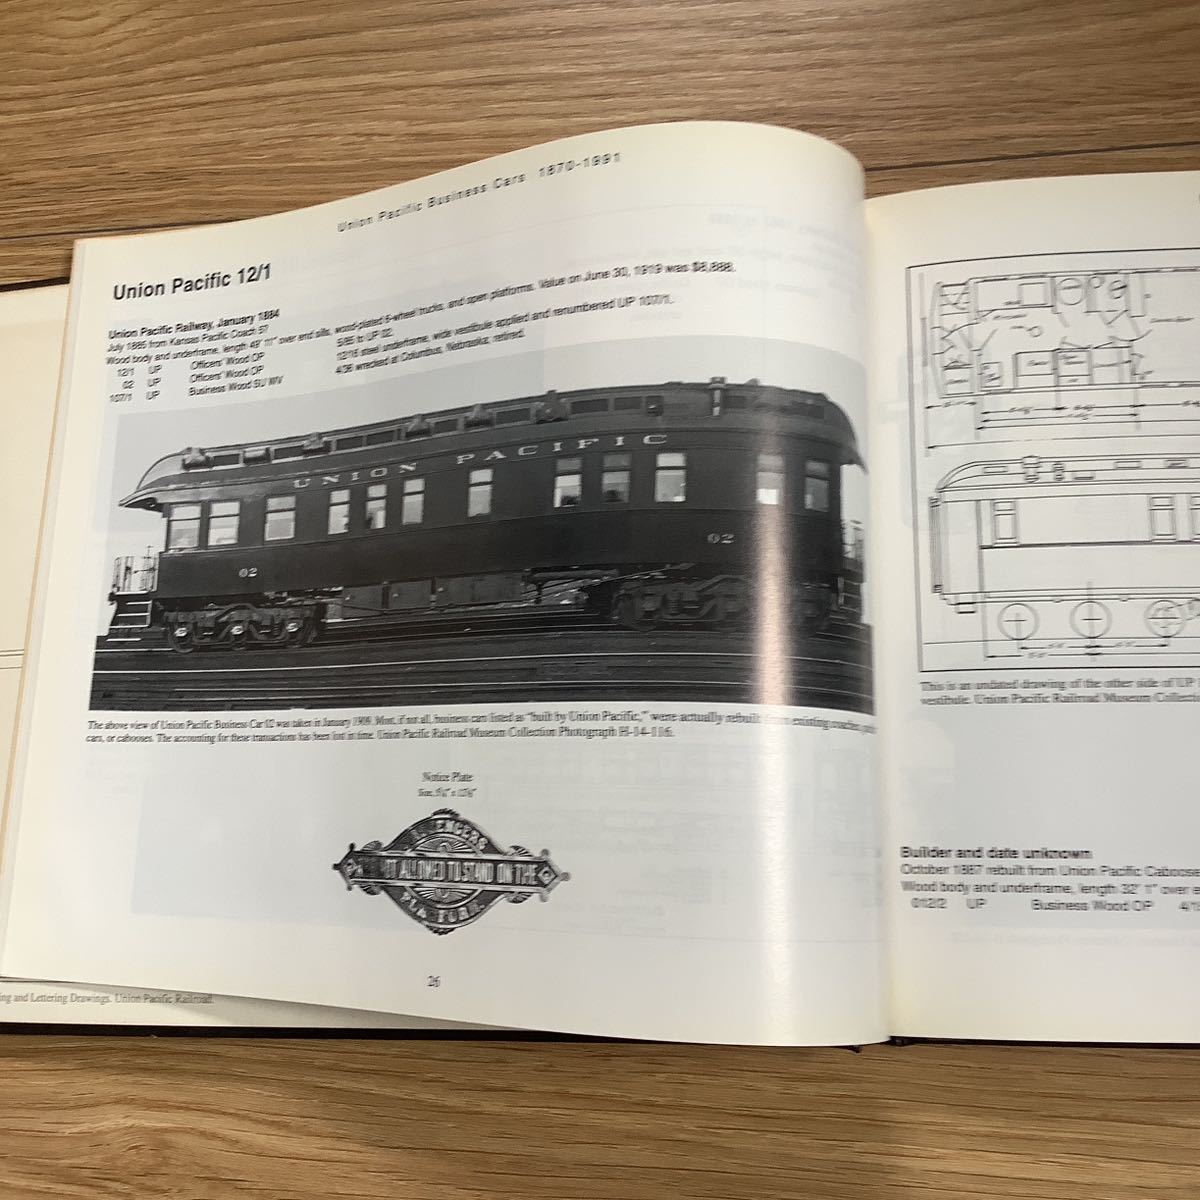 《S3》洋書　ユニオン・パシフィックの商用車両　UNION PACIFIC / BUSINESS CARS 1870-1991　　_画像5